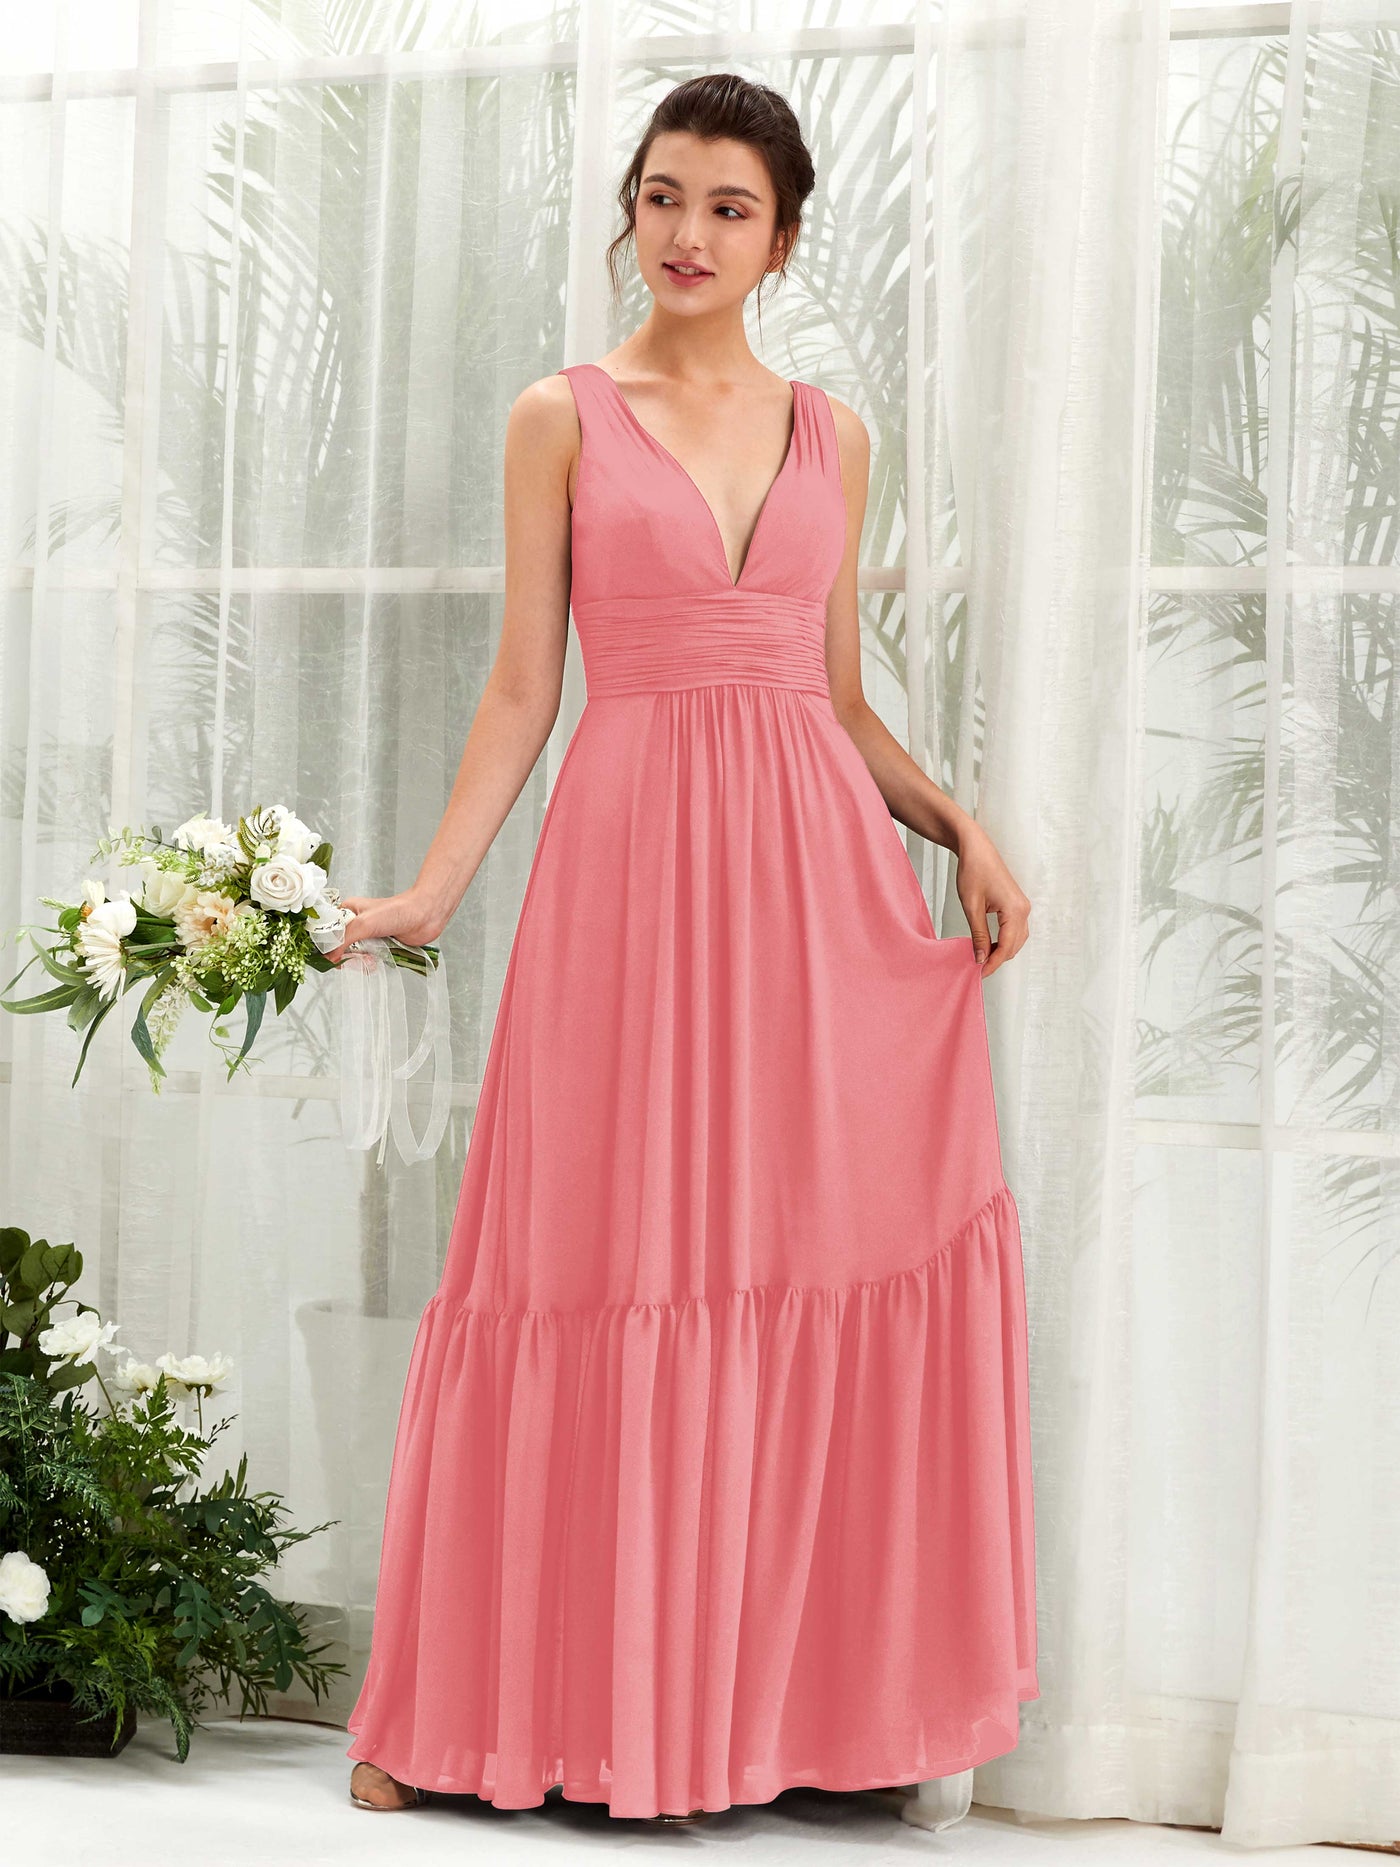 Coral Pink Bridesmaid Dresses Bridesmaid Dress A-line Chiffon Straps Full Length Sleeveless Wedding Party Dress (80223730)#color_coral-pink